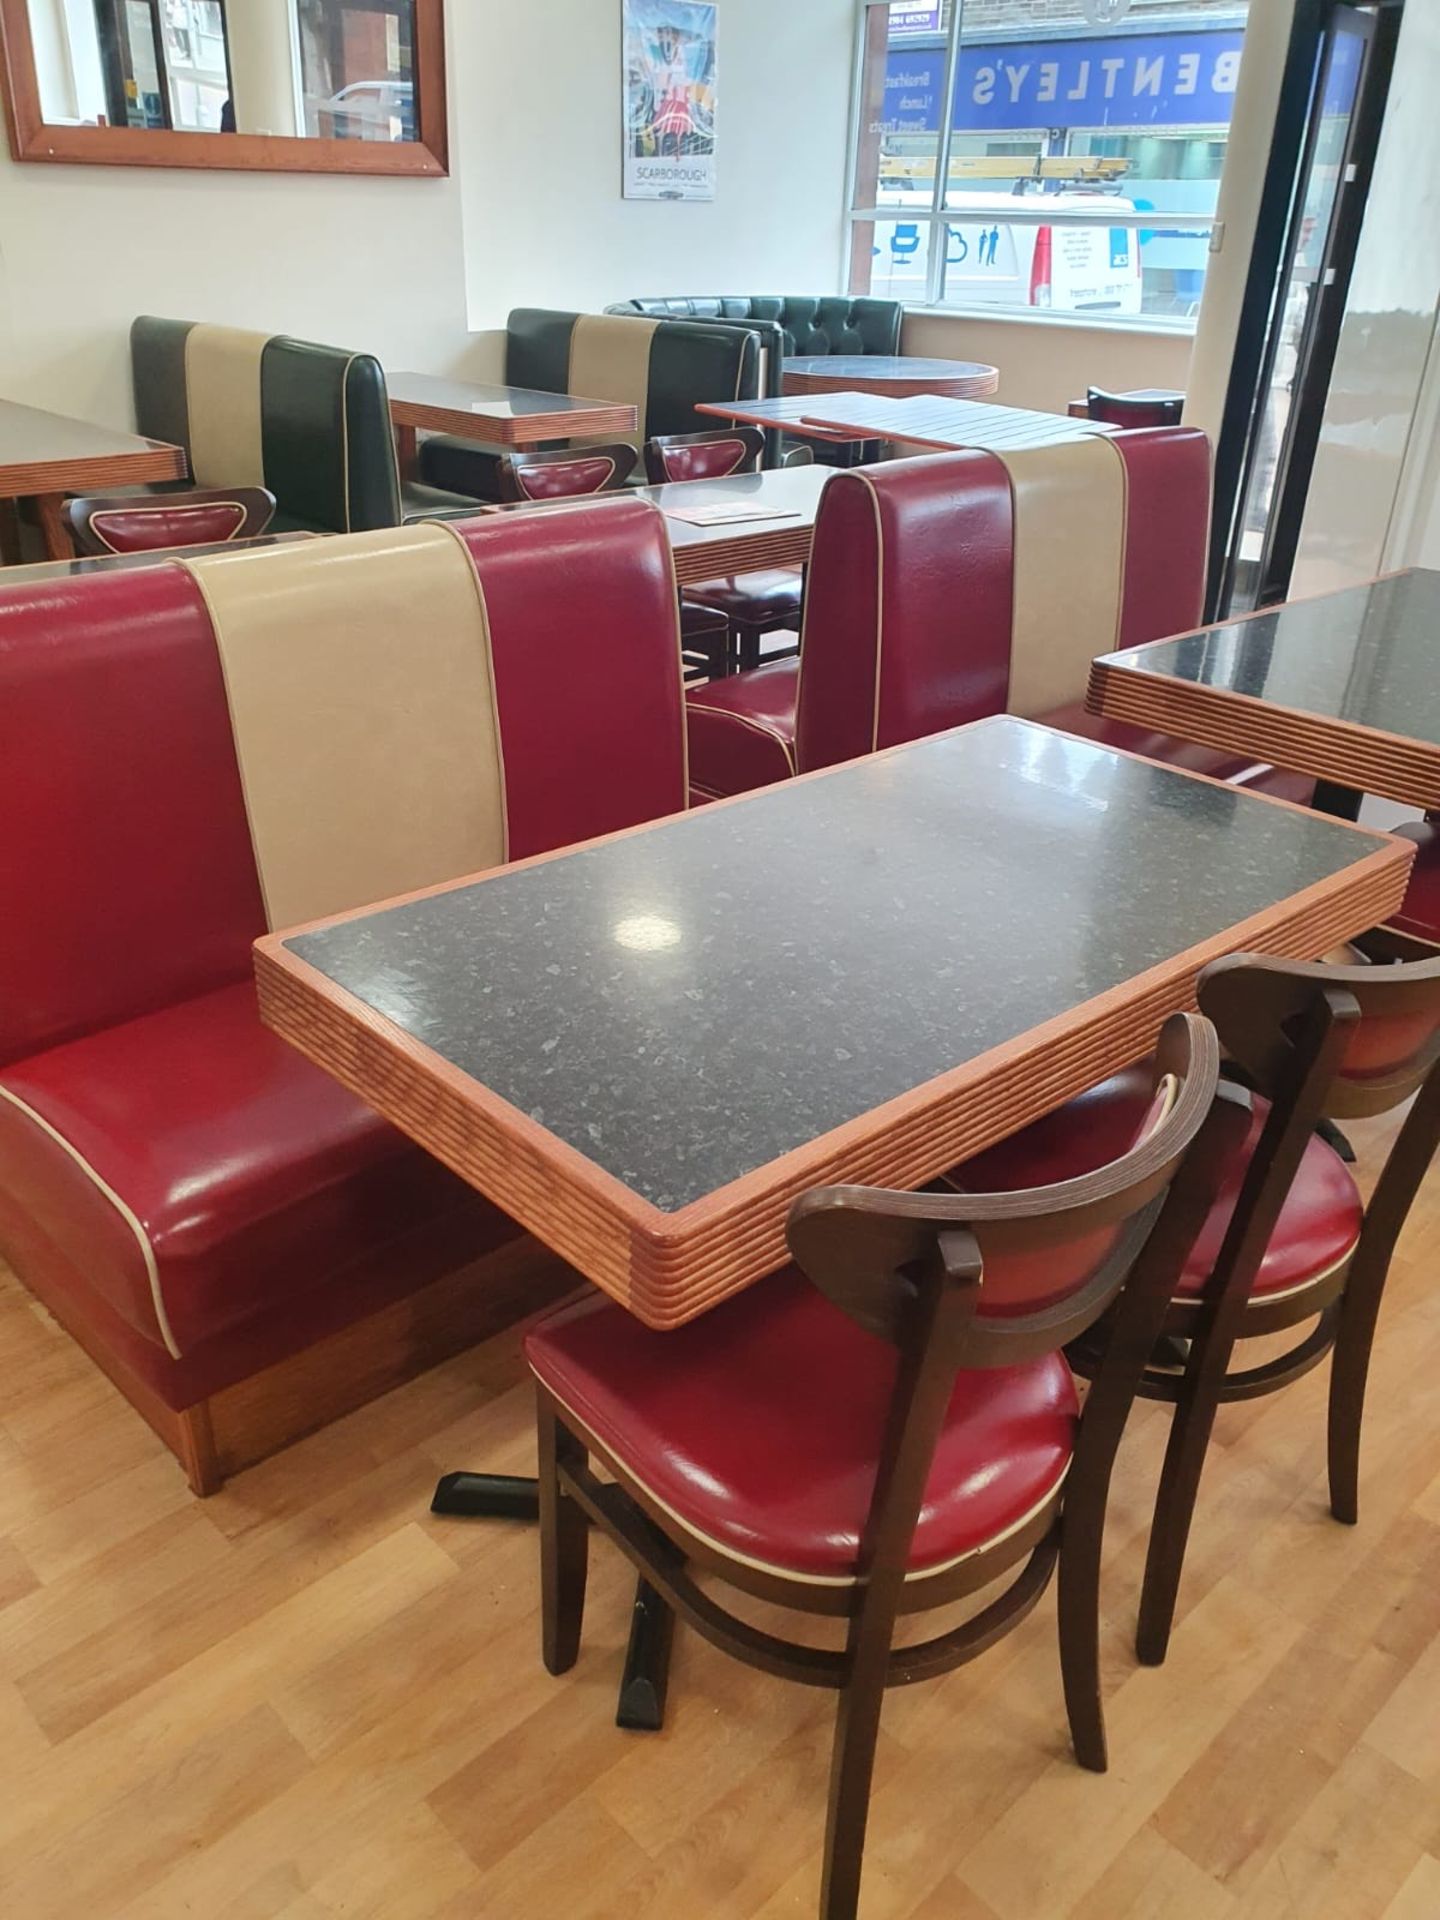 CAFE FURNITURE, CORNER BOOTH, BACK TO BACK SEATING, TABLES AND CHAIRS *NO VAT* - Image 4 of 7